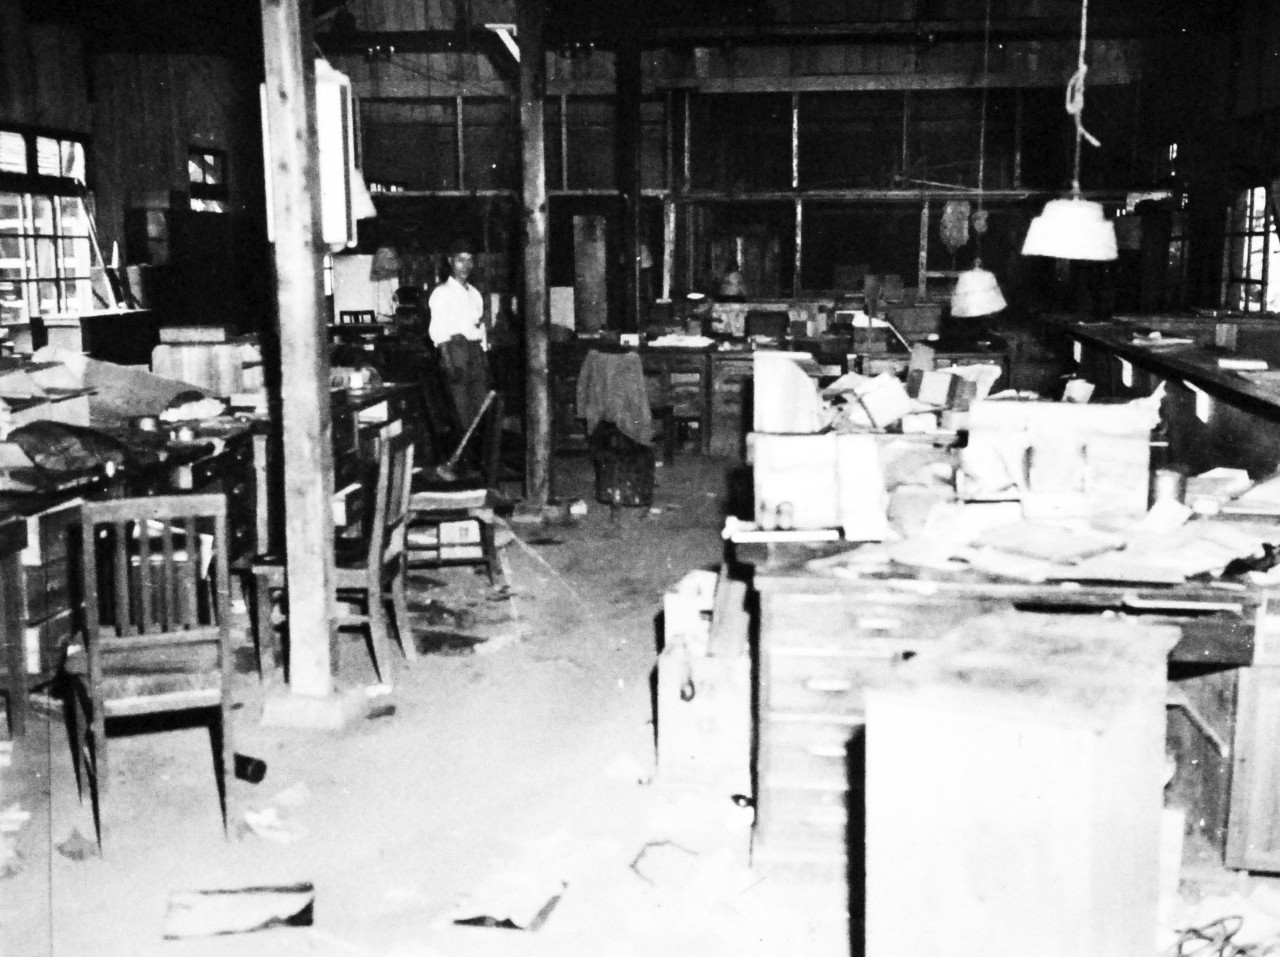 127-GW-1643-149534:     Nagasaki, Japan, 1945.   Damaged office at Otao.        Photographed at Nagasaki by Private Smeltzer, October 6, 1945.        Official U.S. Marine Corps Photograph, now in the collections of the National Archives.  (2016/10/25).